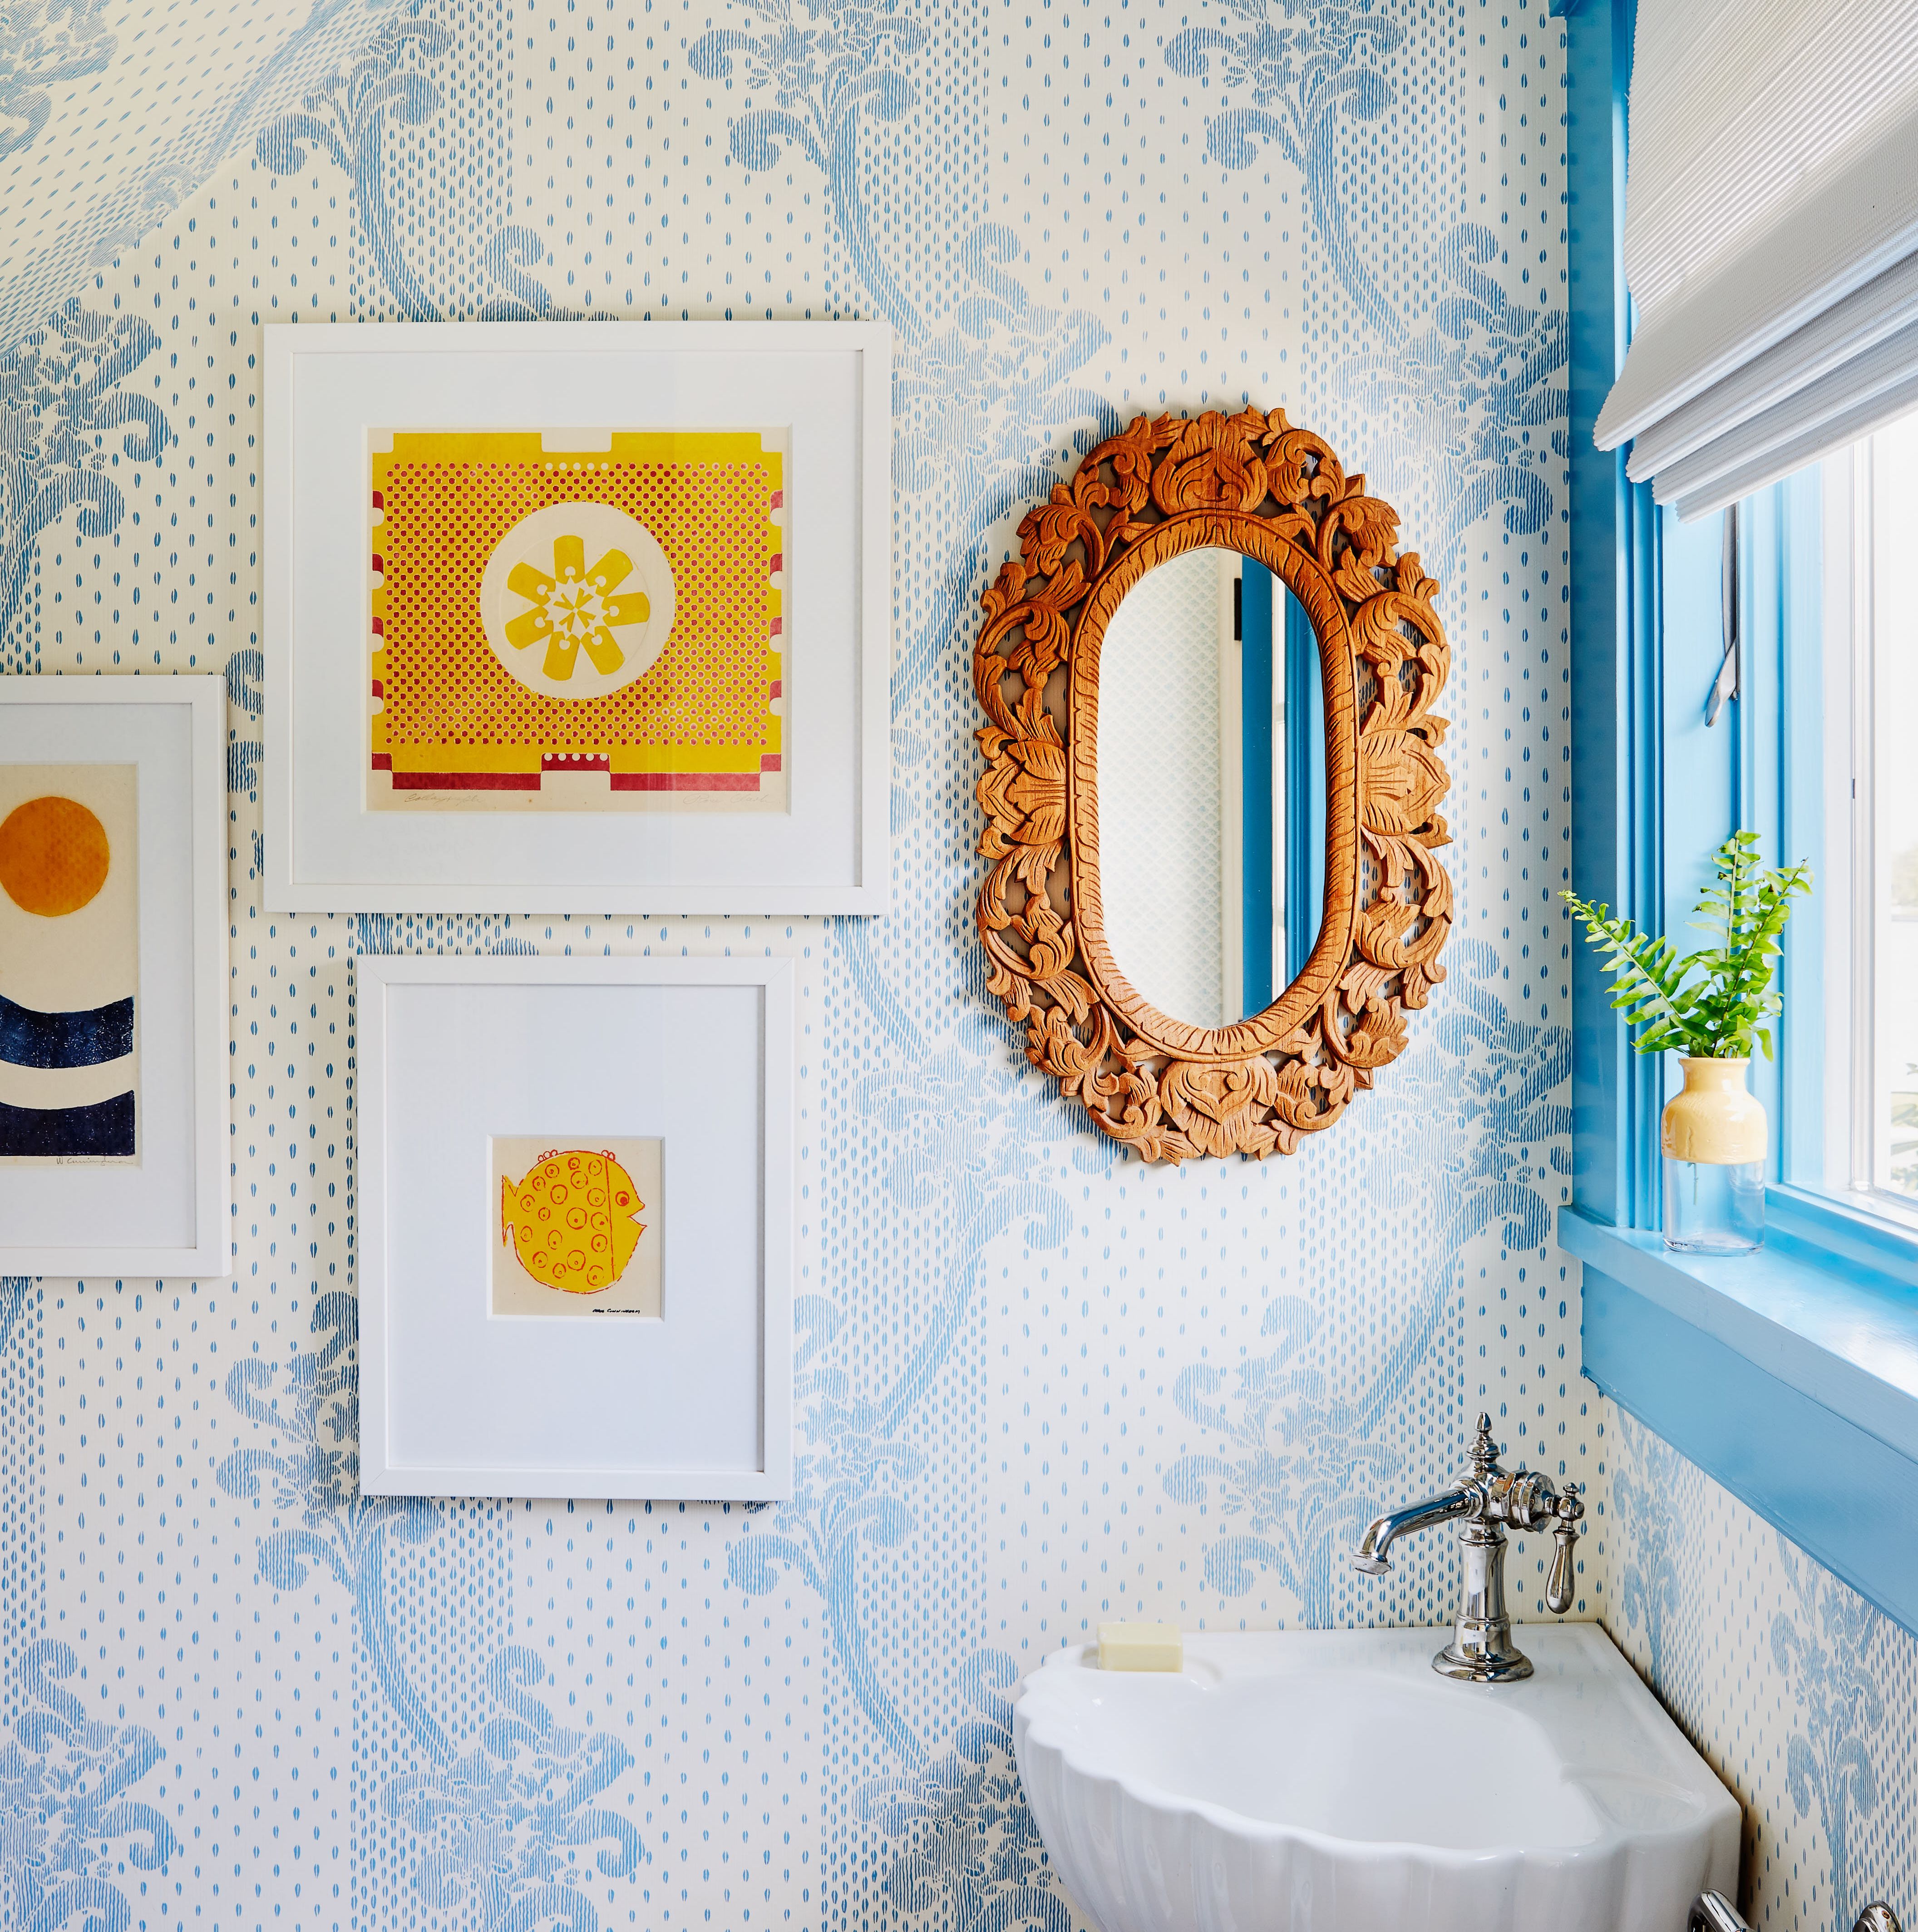 20 Art-Filled Bathrooms We Can't Get Enough Of